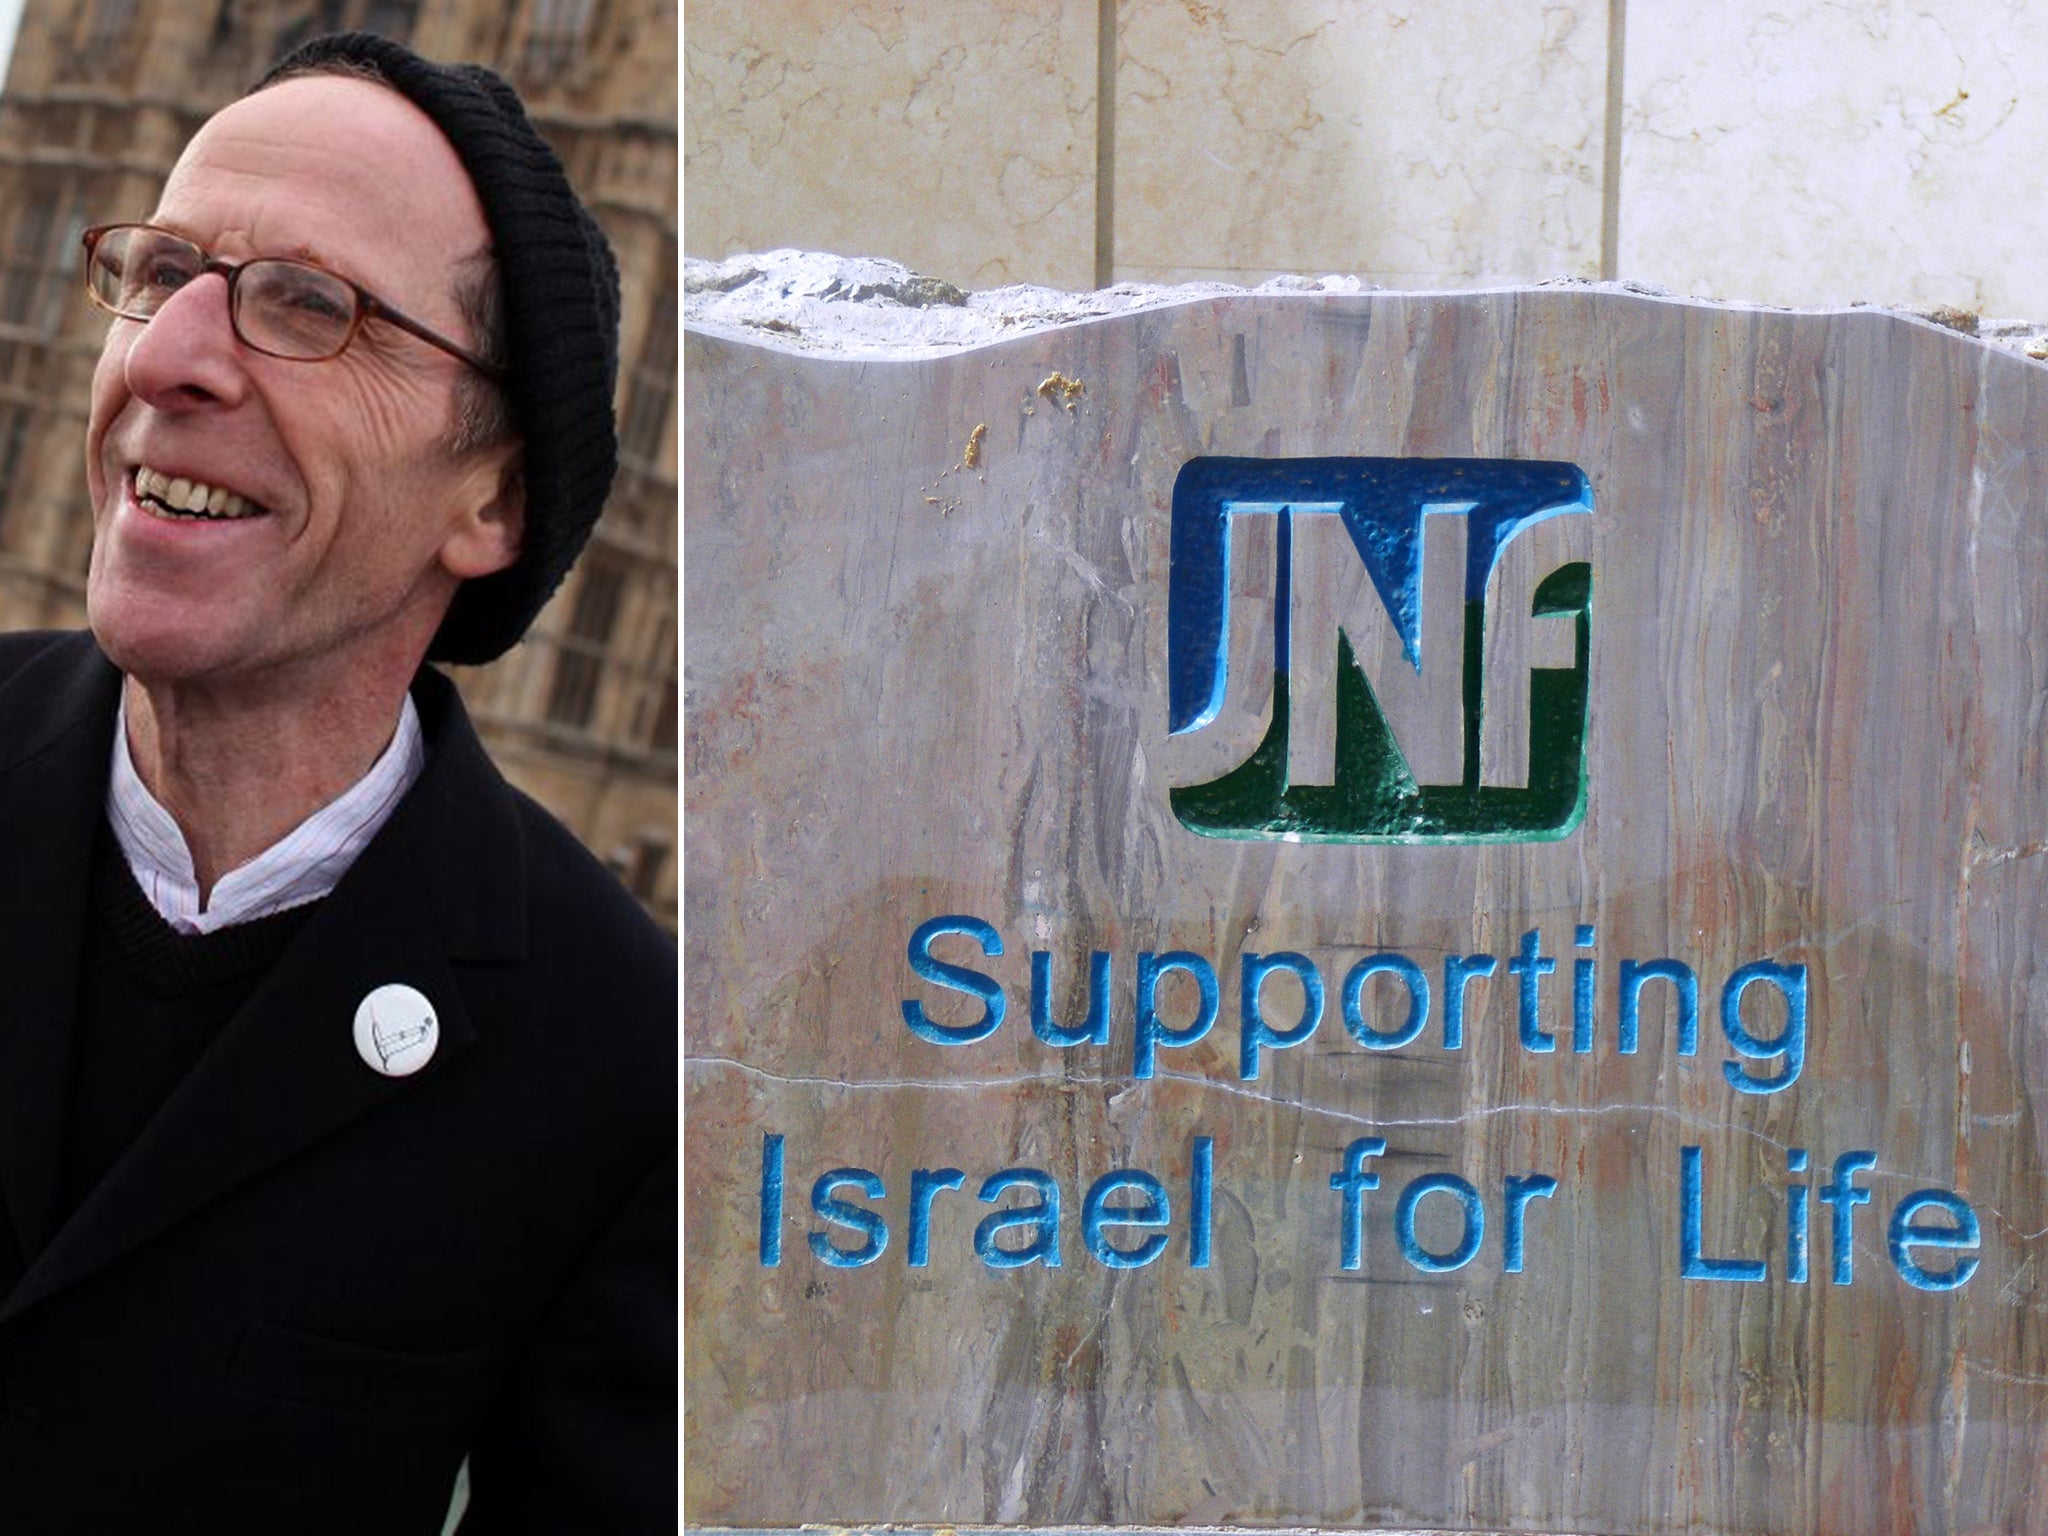 Comic Ivor Dembina has staged his ‘Traditional Jewish Xmas Eve Show’ for the past 20 years; the JNF UK charity is linked to the Jewish National Fund, set up to fund Jewish people buying land in Palestinian territories